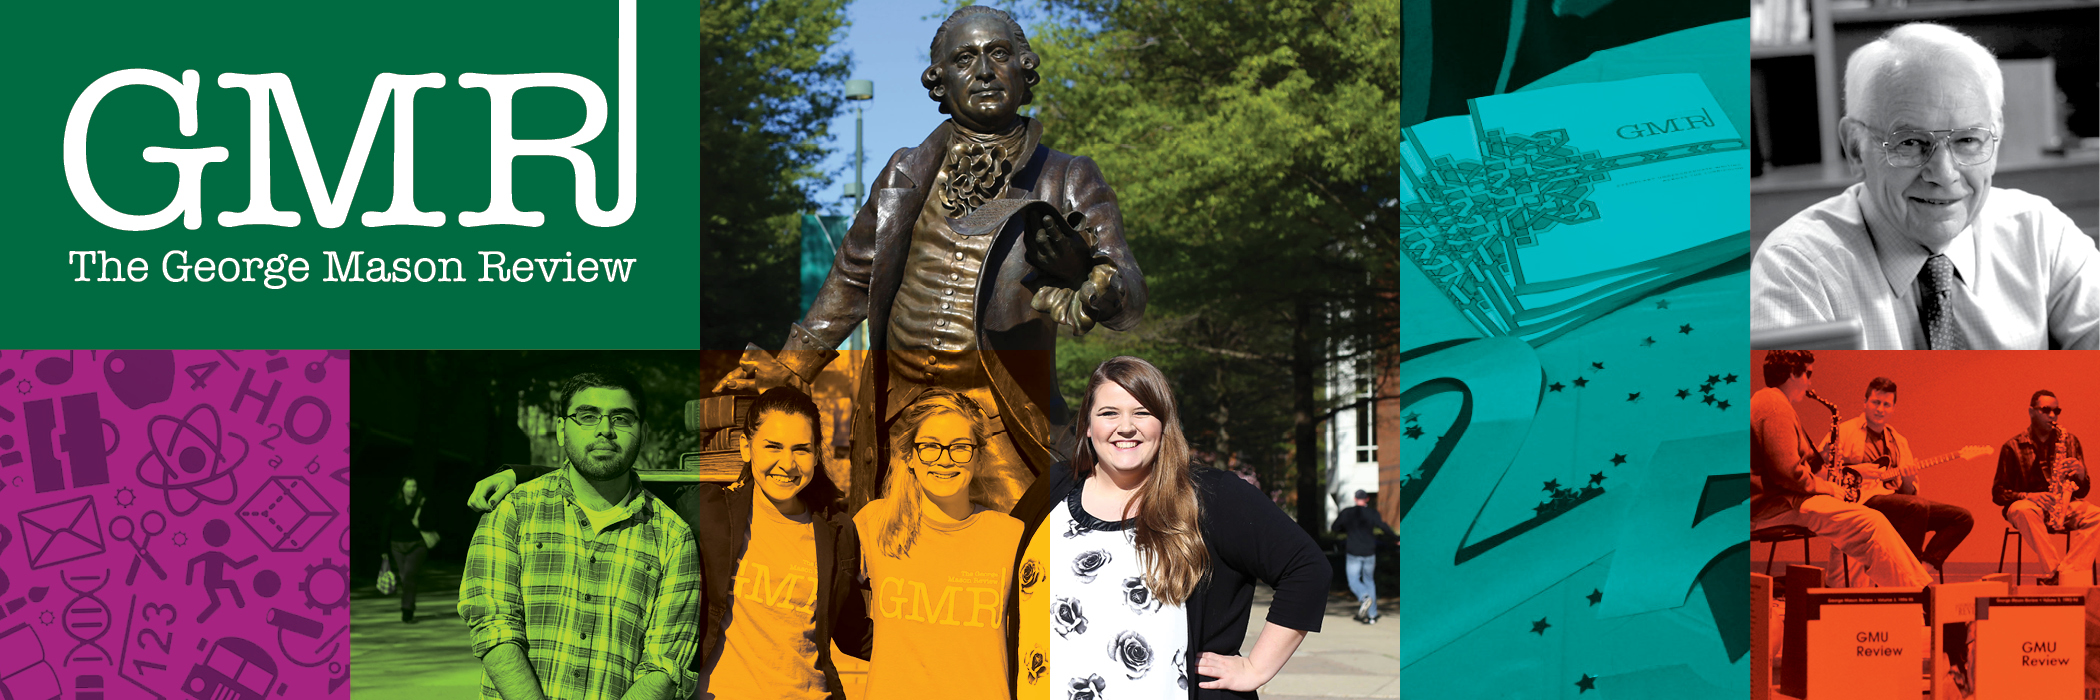 The george mason review feature image